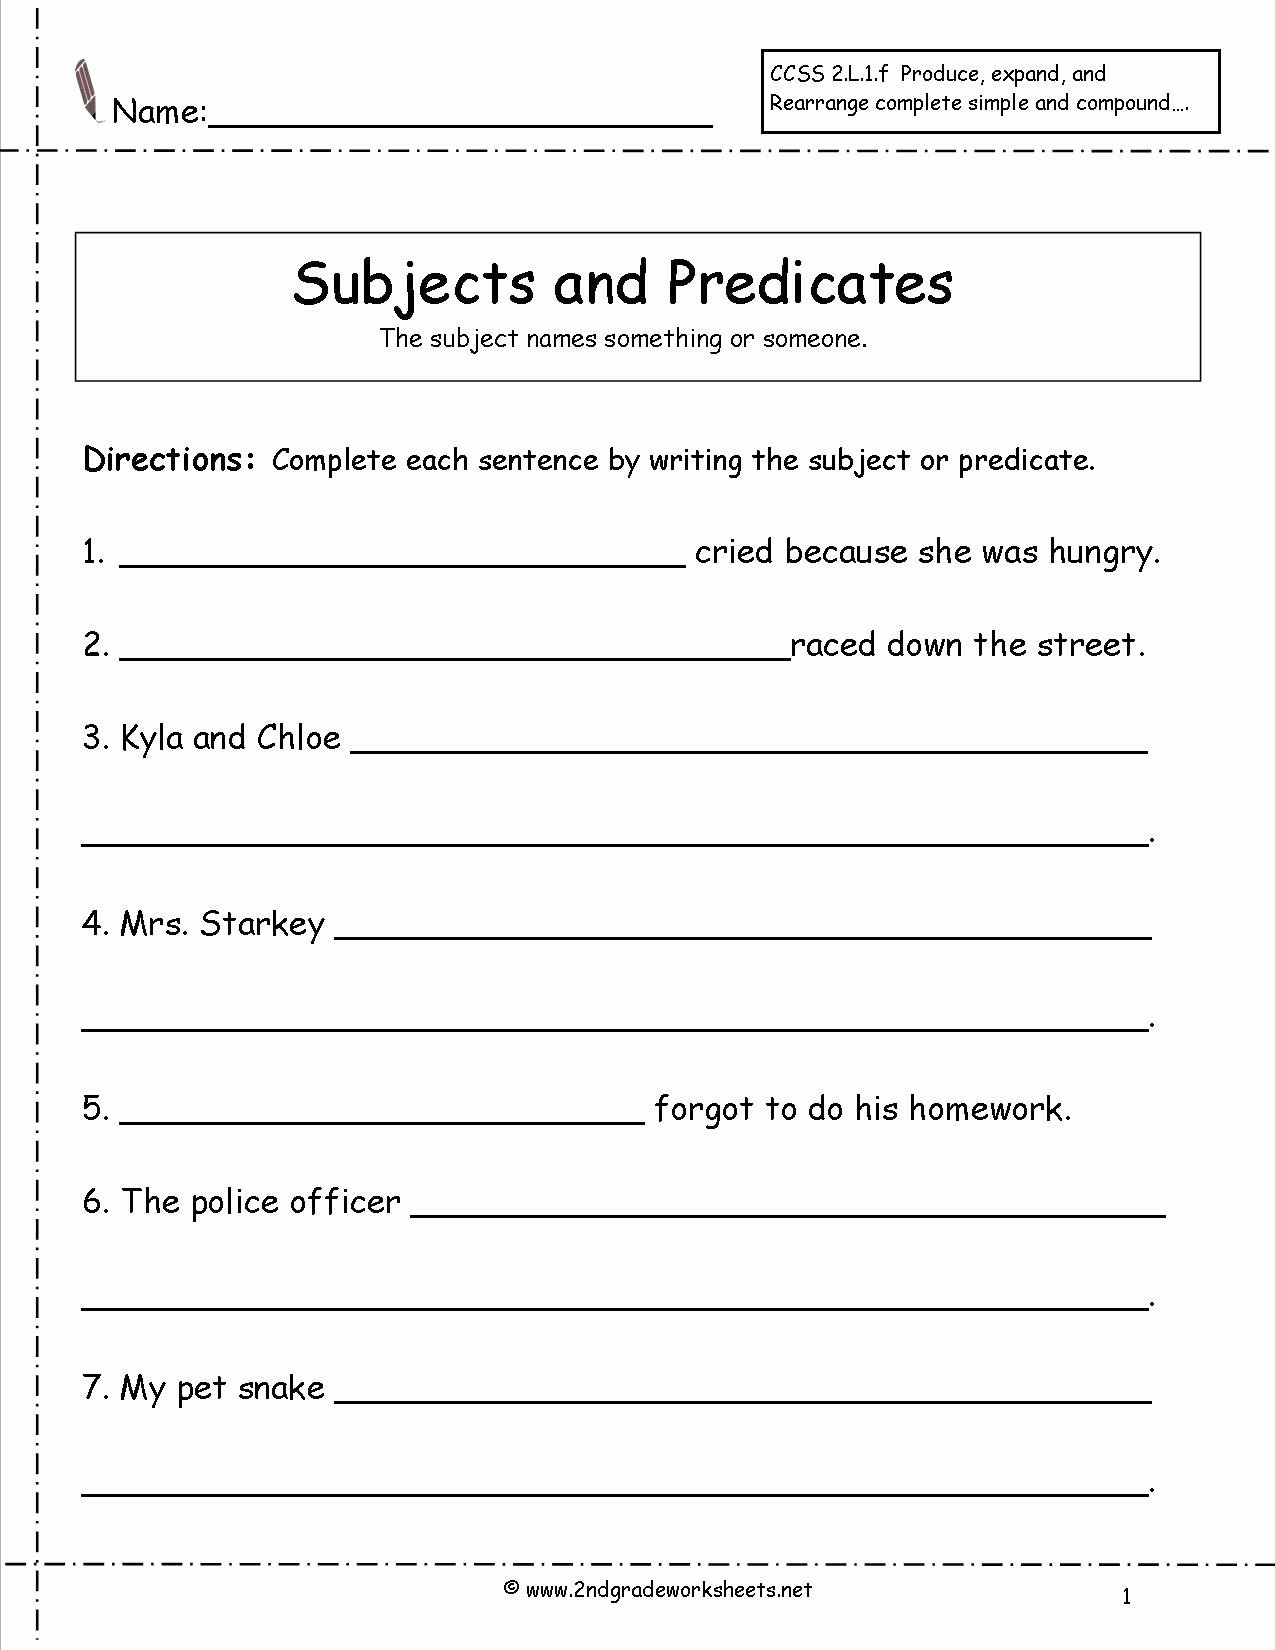 Subject and Predicate Worksheet Fresh Second Grade Subject and Predicate Game Google Search